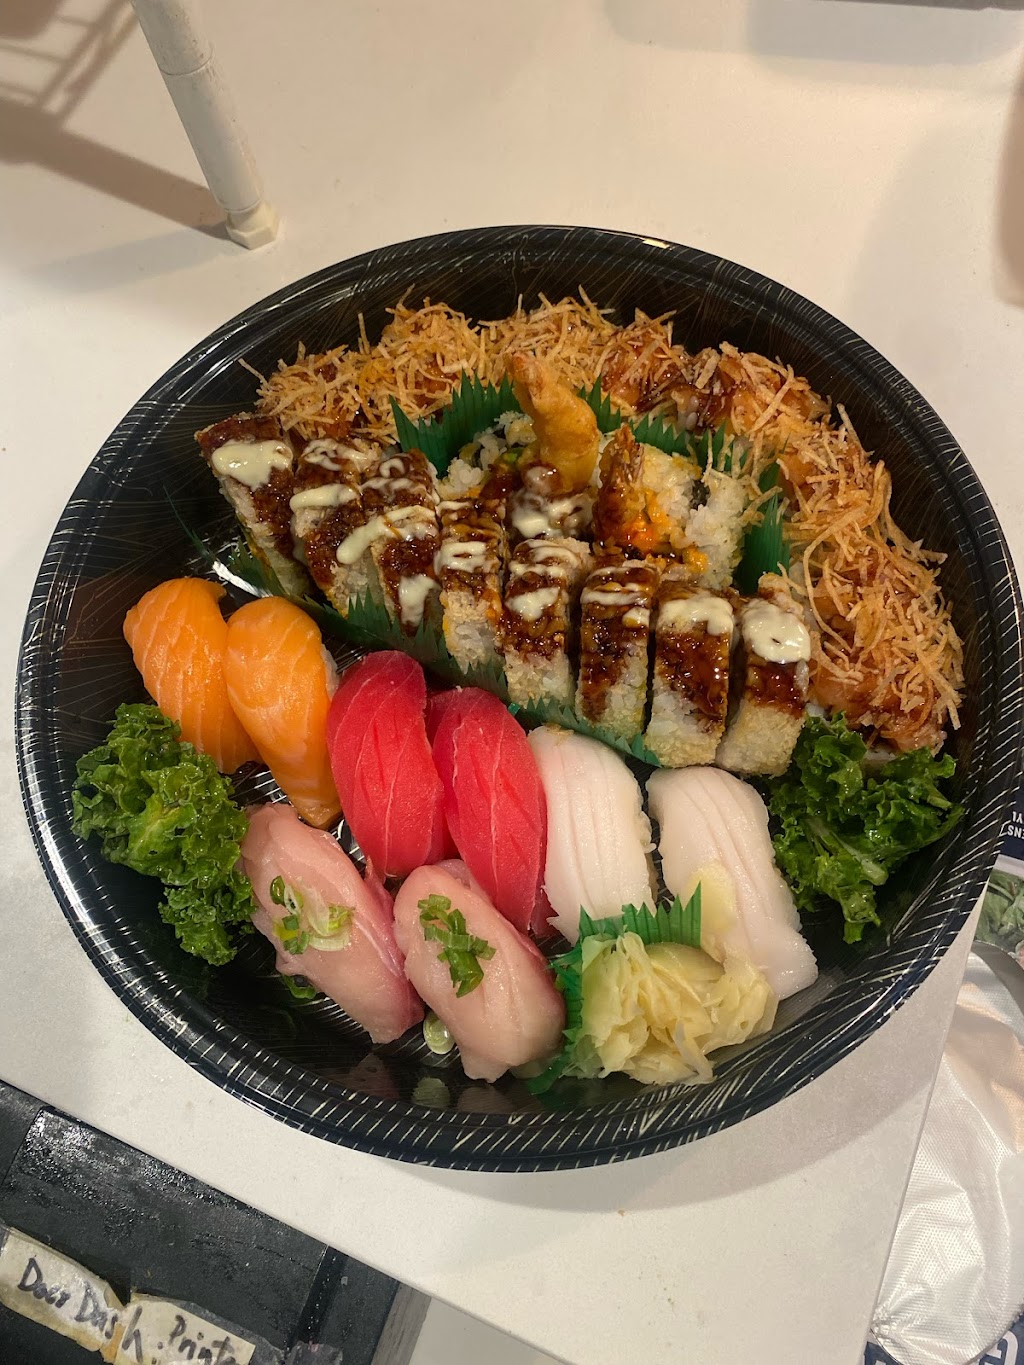 Simply Sushi & Noodles/ Fresh-Healthy and Poke. | 2750 Dundee Rd #1, Northbrook, IL 60062, USA | Phone: (847) 715-9214